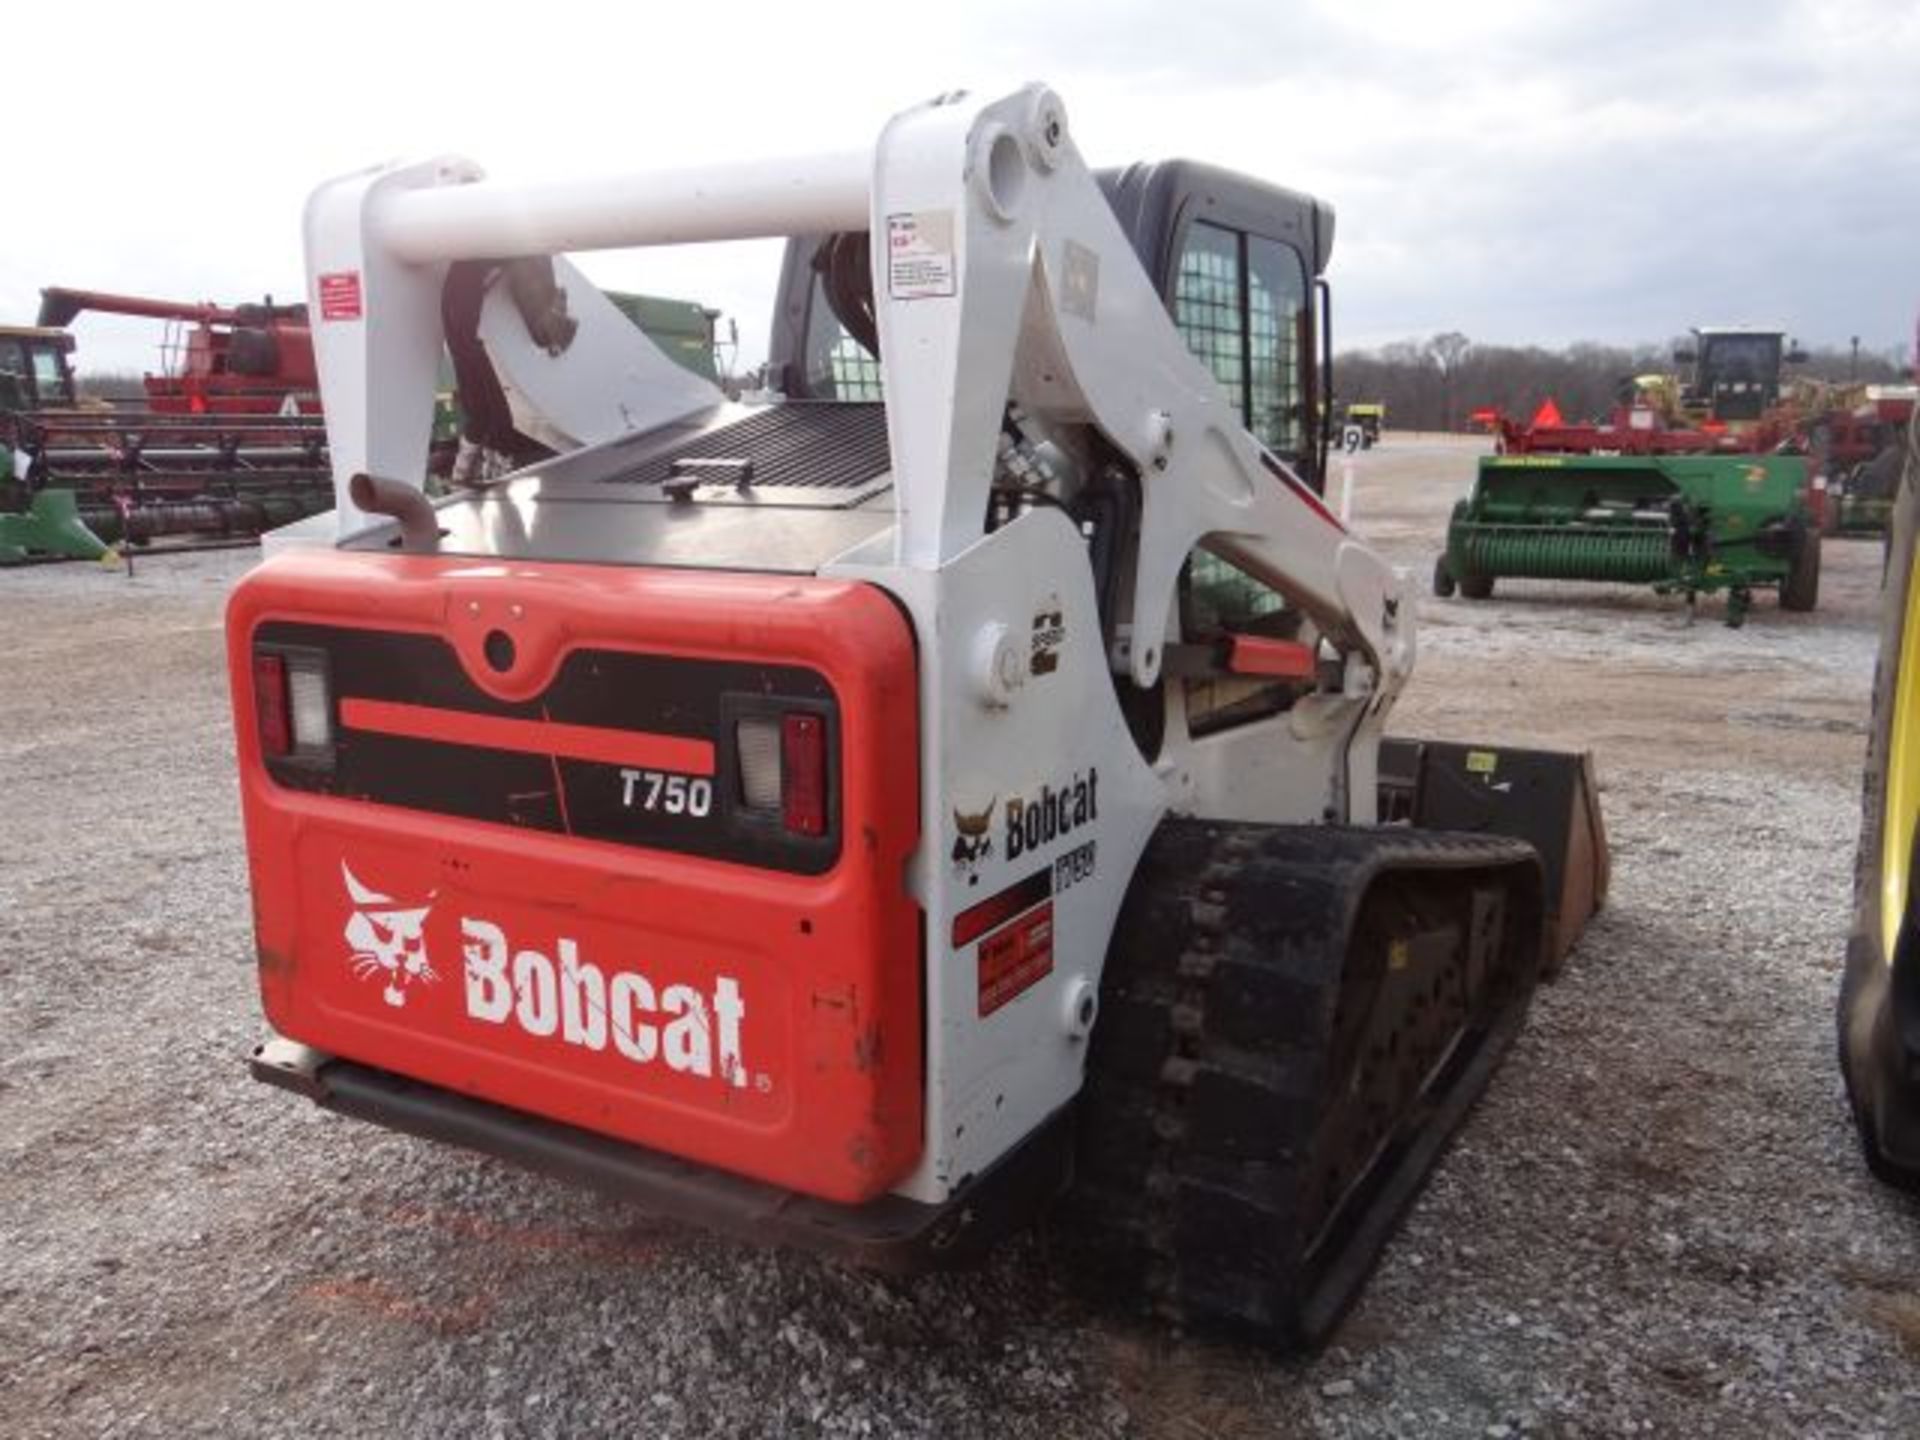 Bobcat T750, 2014 #158901, CTL, Cab w/ AC and Heat, Joystick Controls Switchable From ISO and H - Image 6 of 6